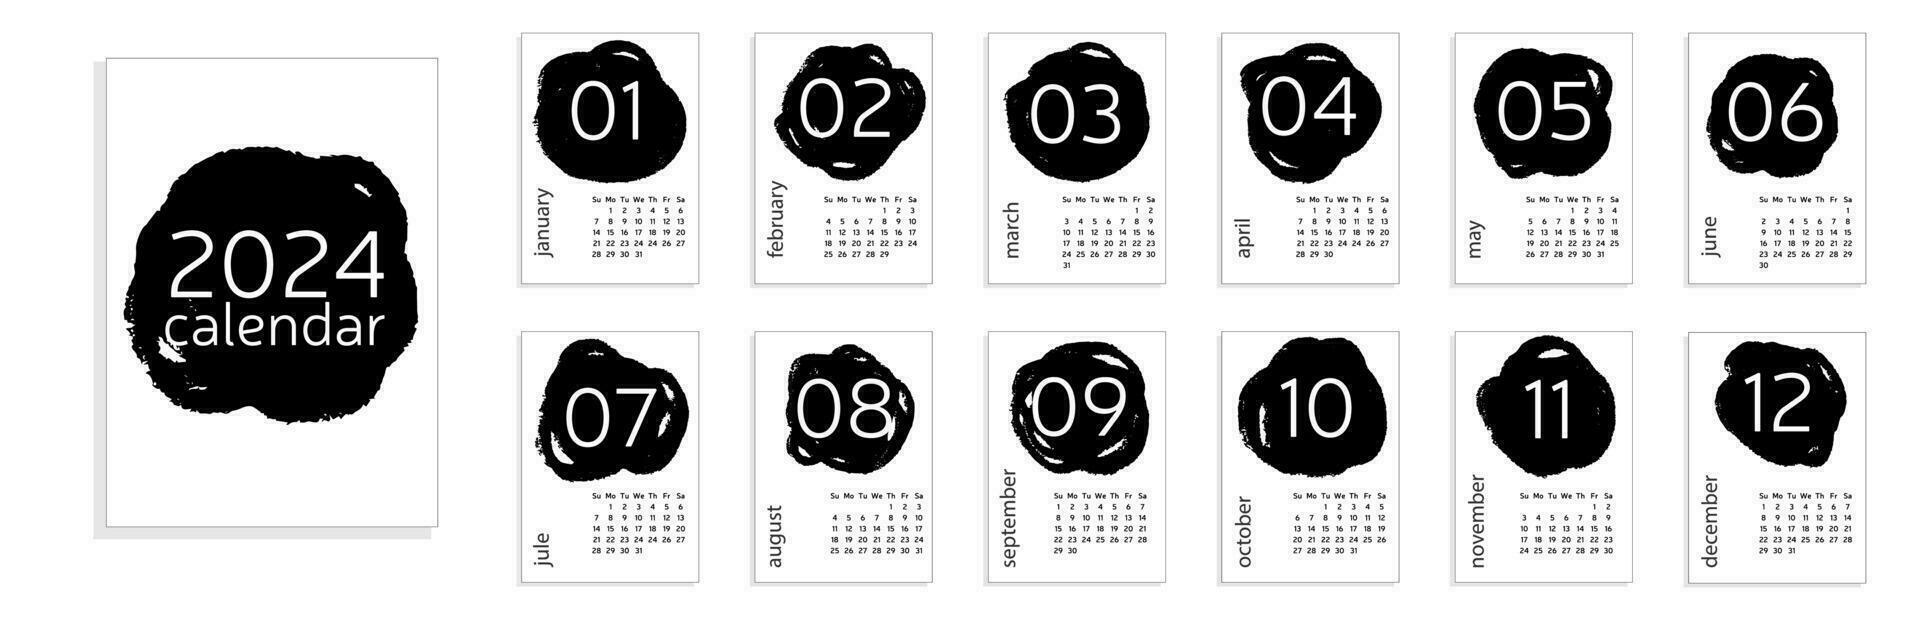 Calendar 2024 A4 with number months. Week stars on Sunday. Vector illustration.